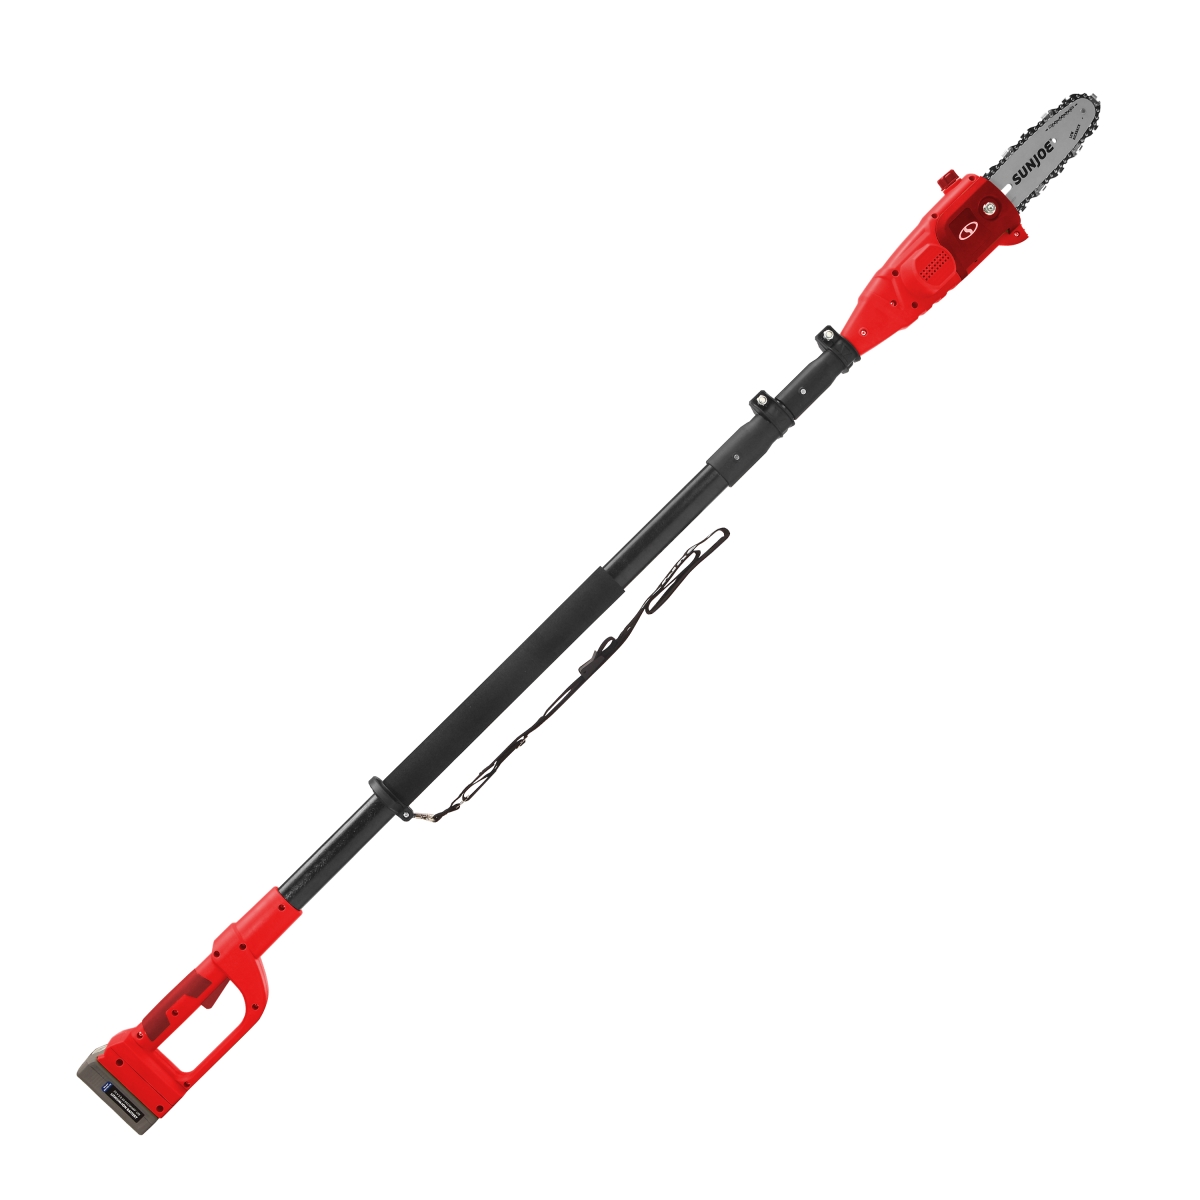 20vionlt-ps8-red 8 In. 2.5a 20v Cordless Telescoping Pole Chain Saw, Red